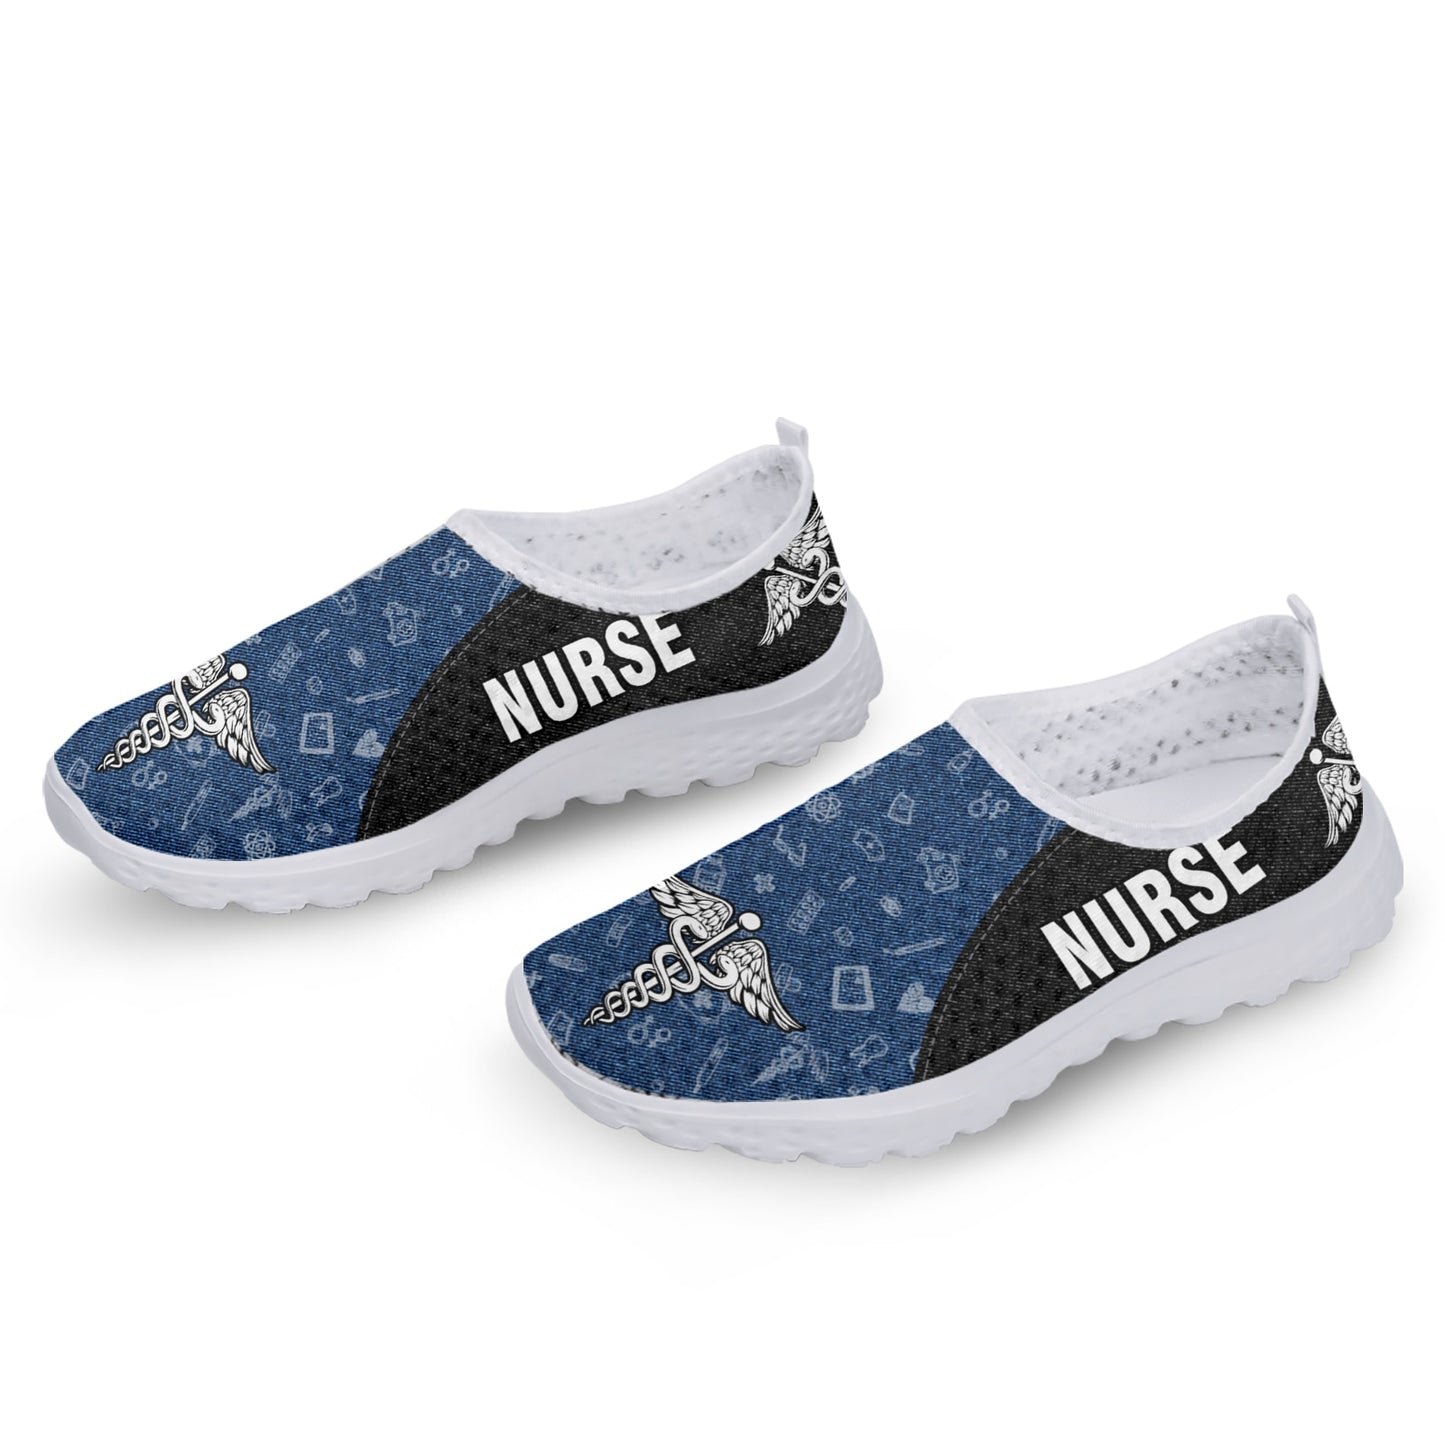 Blue Nurse Logo Mesh Shoes Lightweight Breathable Home Shoes Lightweight Soft Flats Loafers Slip On Casual Shoes